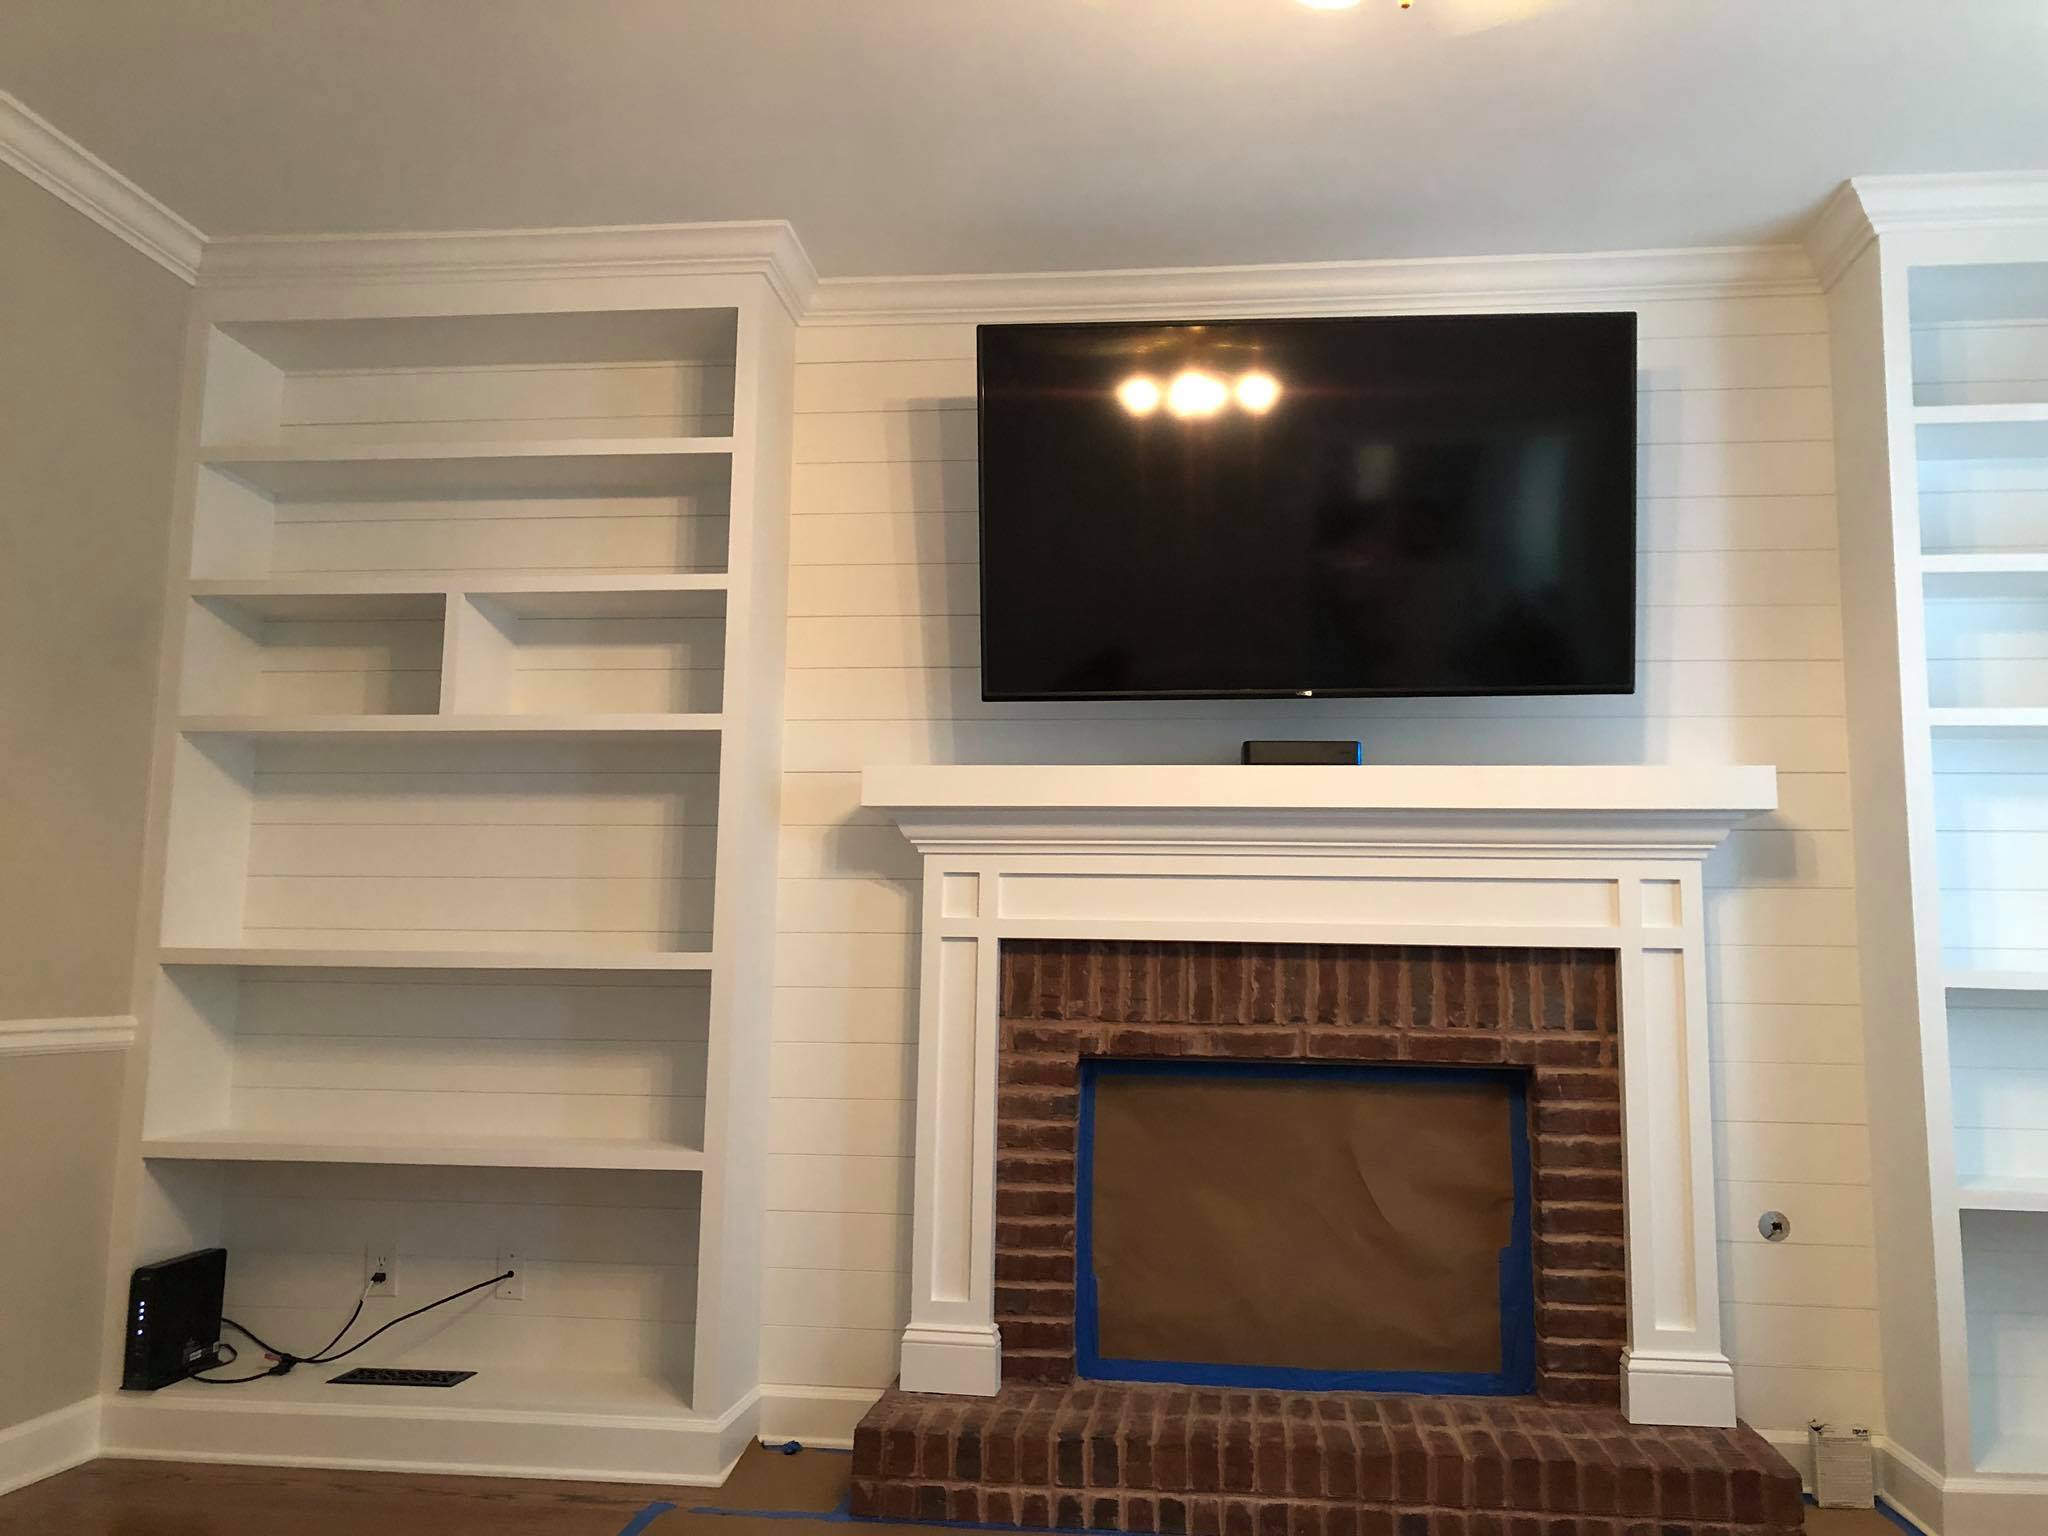 Fireplace Custom Wall High Built in Cabinets Shelves and Trim Painted White Installed 4